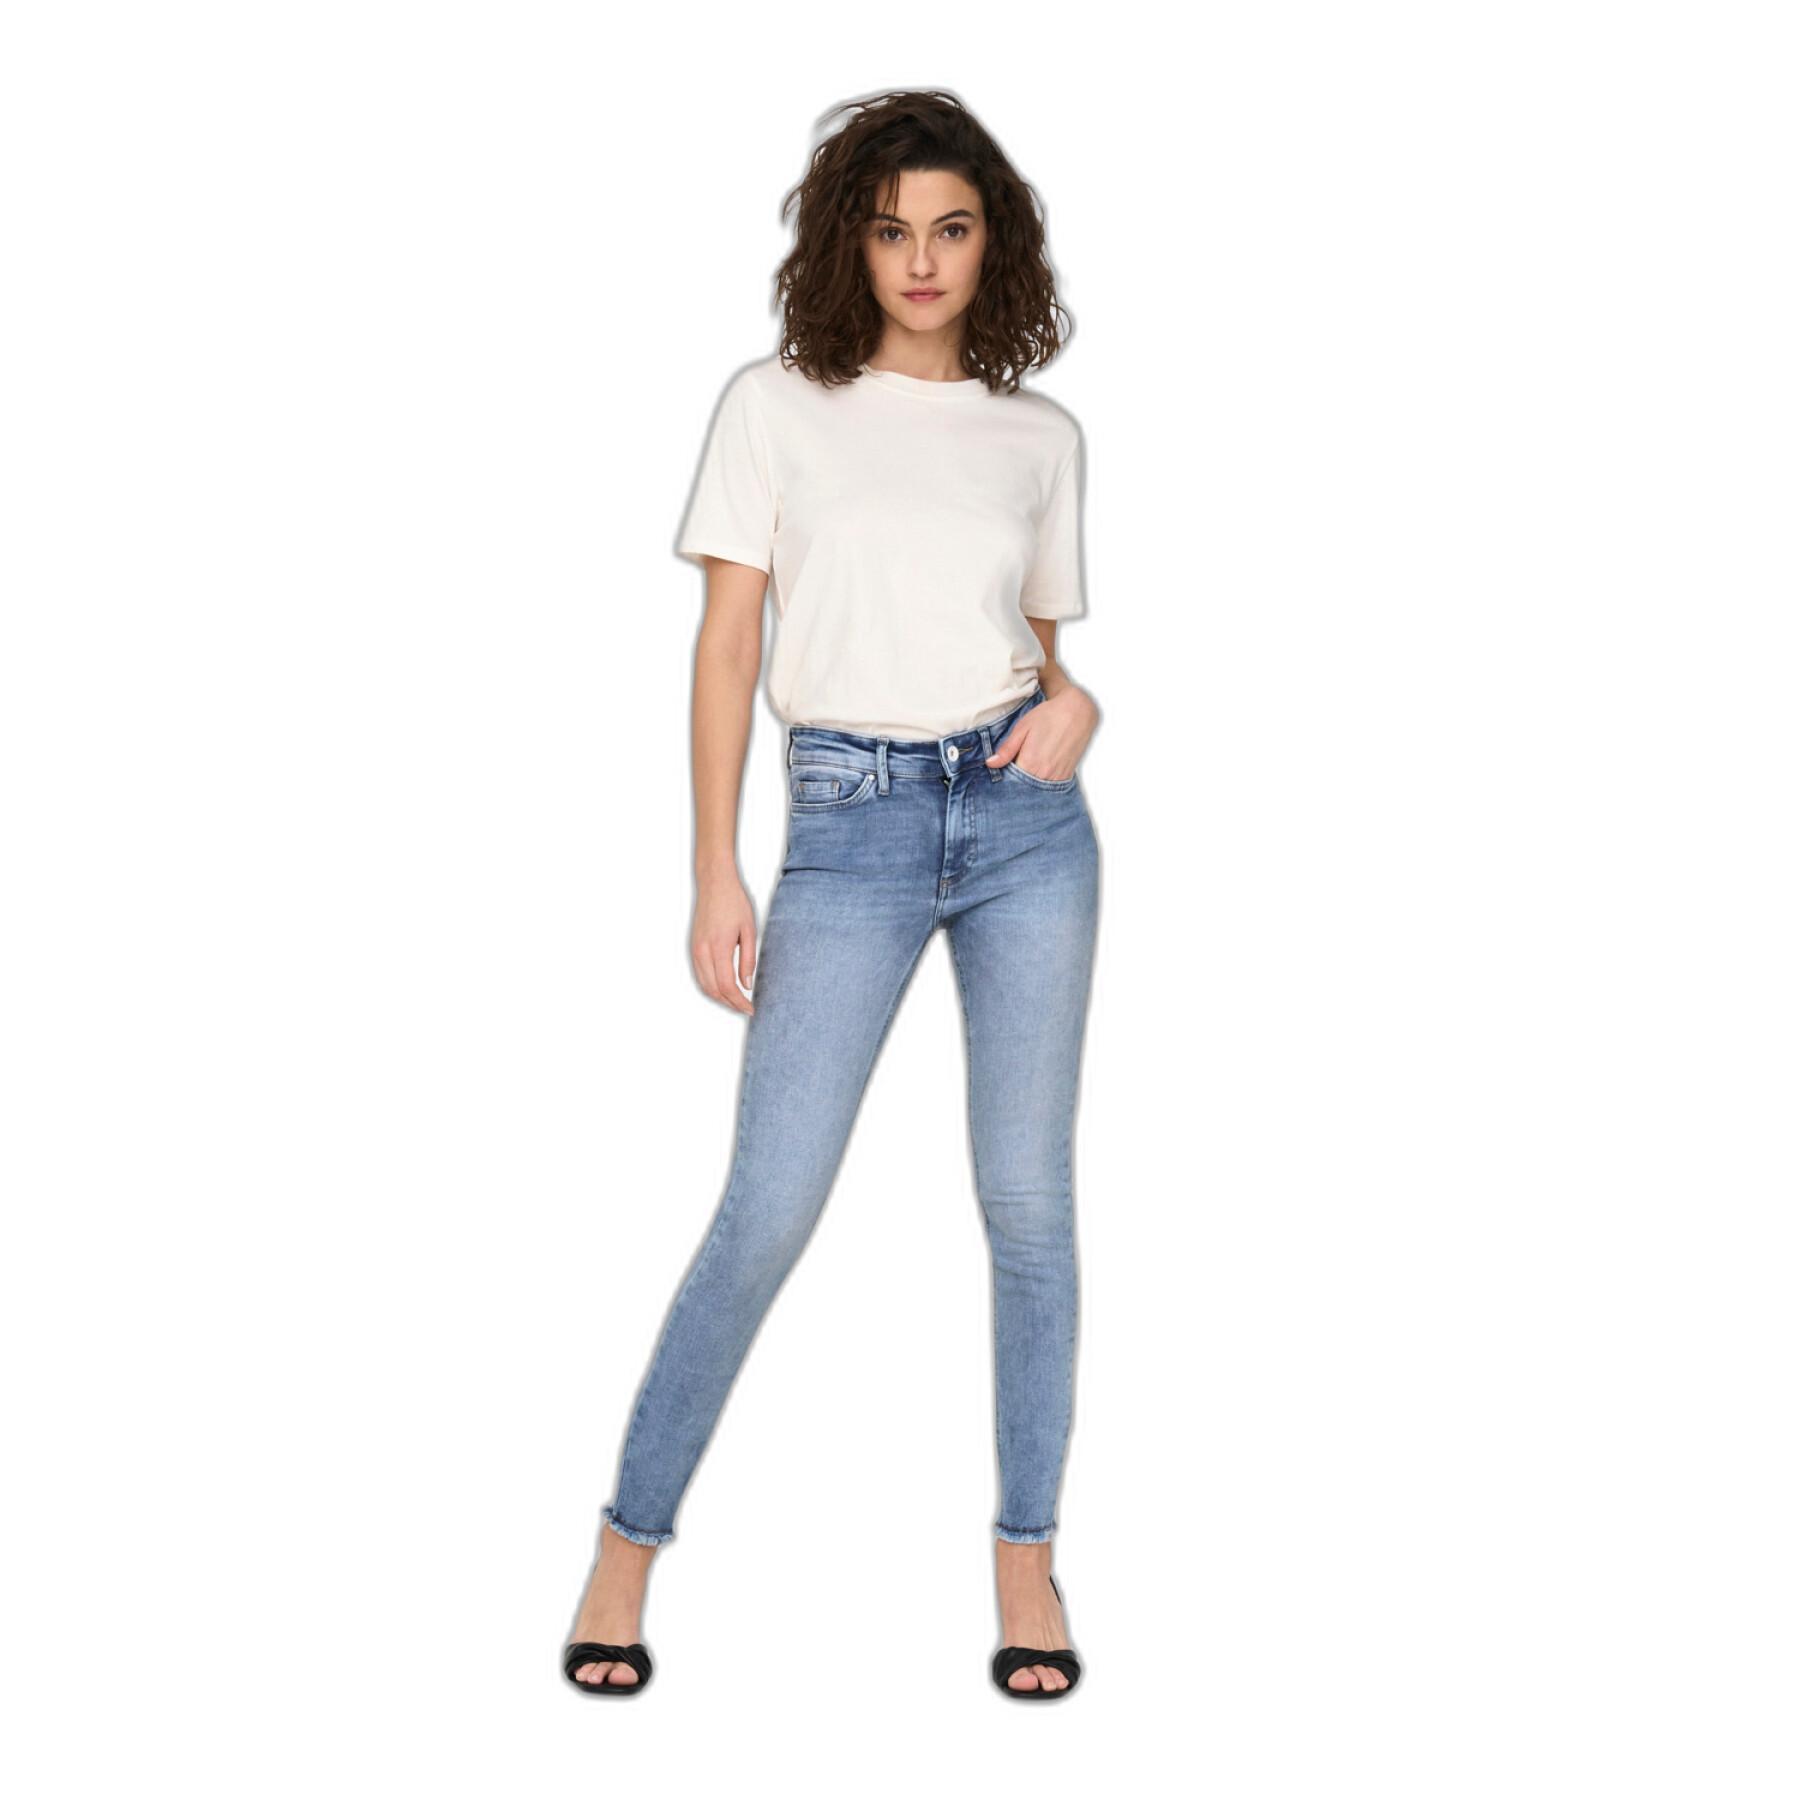 Jeans mulher magricela média Only Blush Rea694